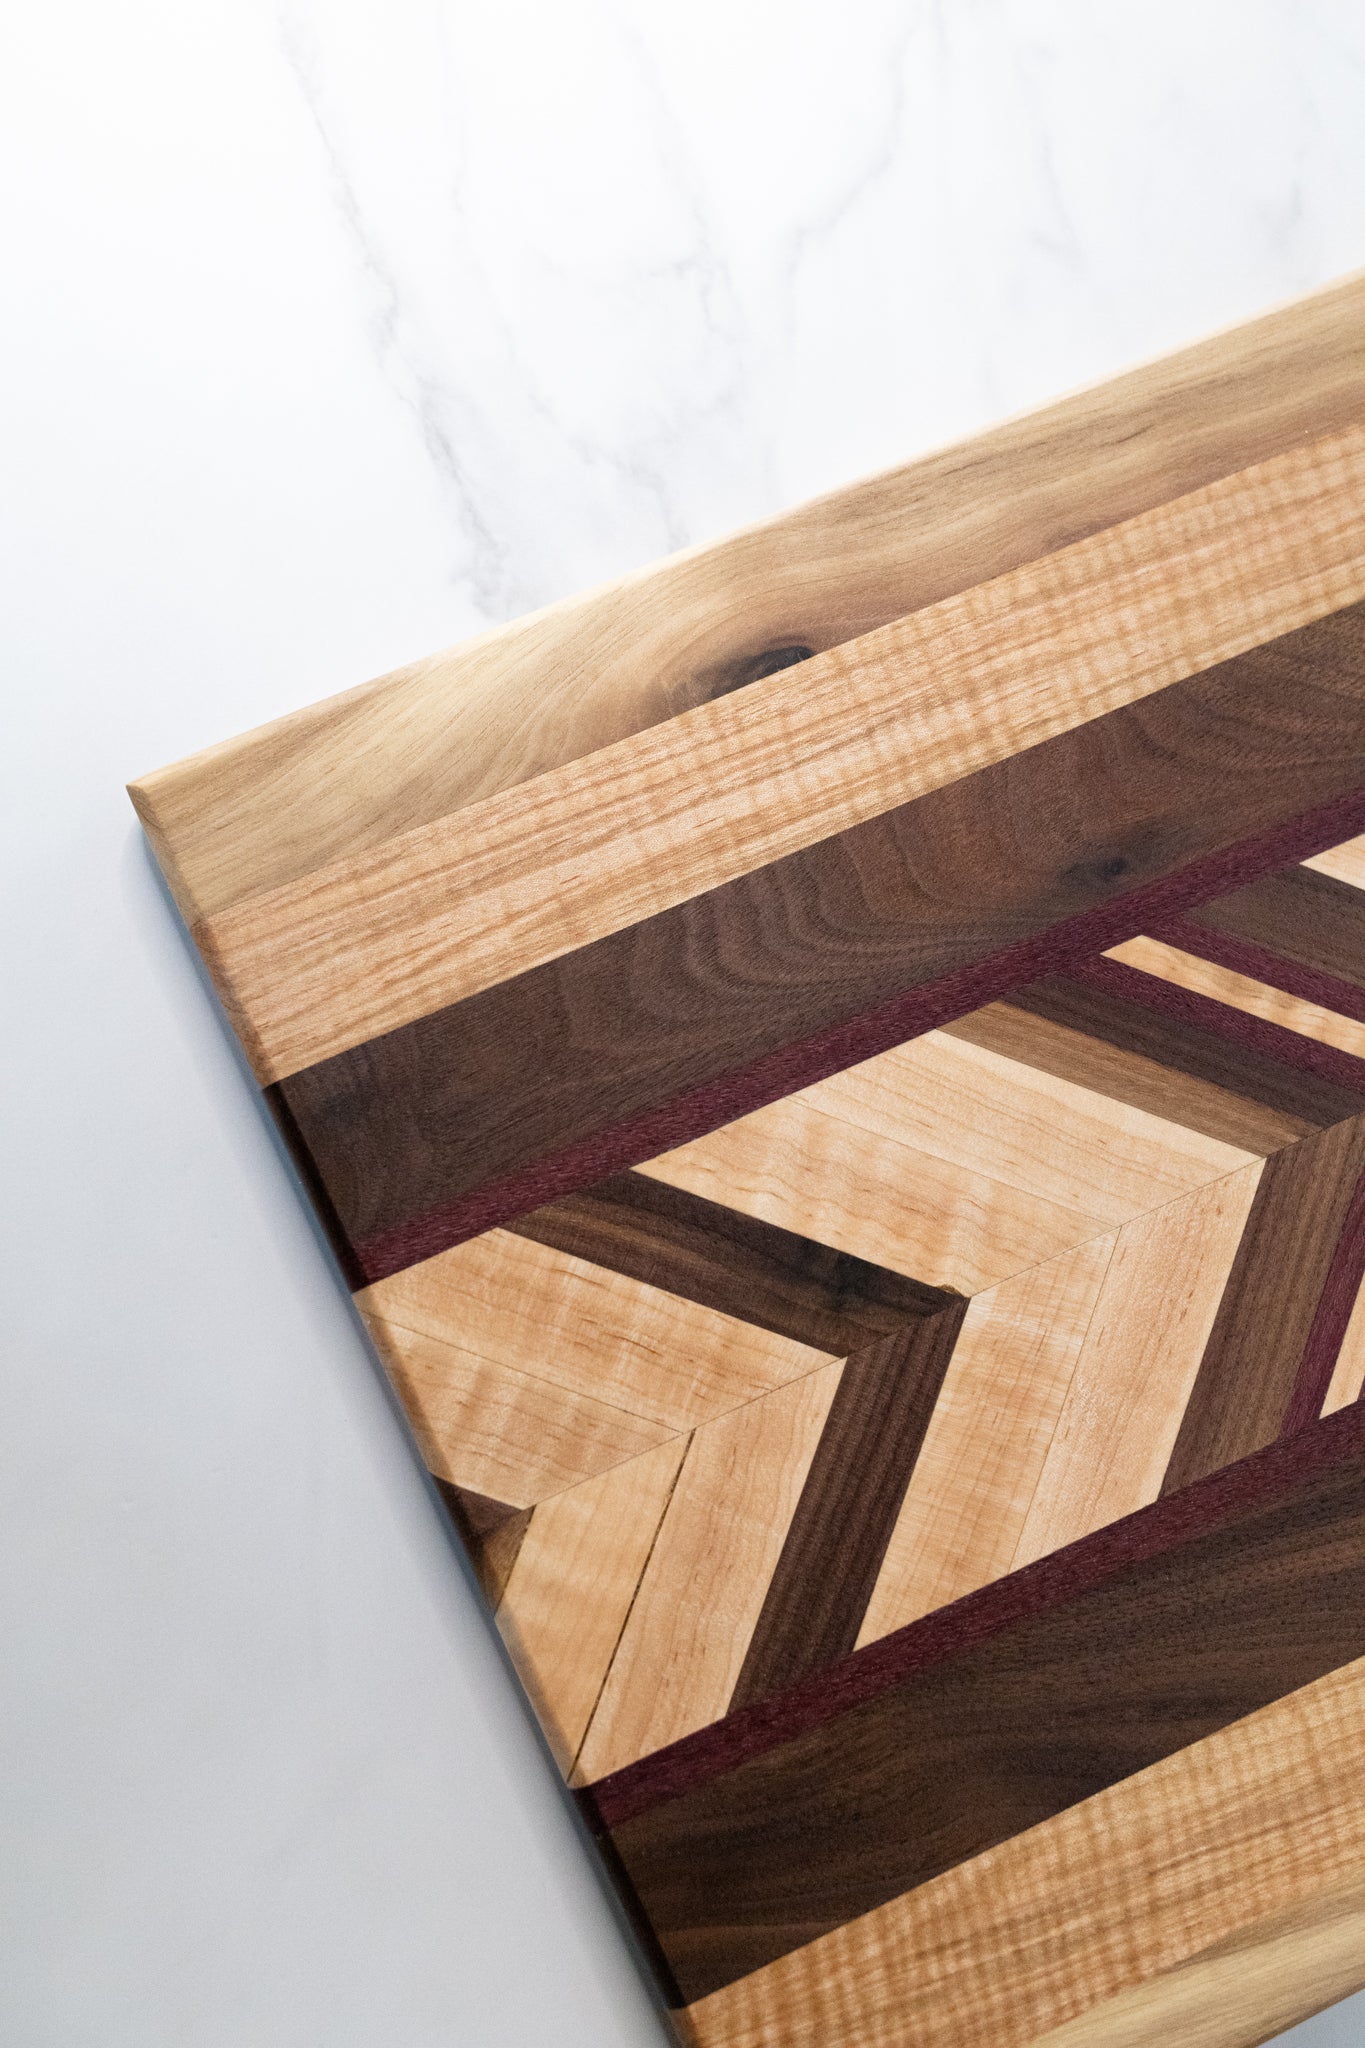 Handcrafted Mini Wood Cutting Board: Functional and Beautiful